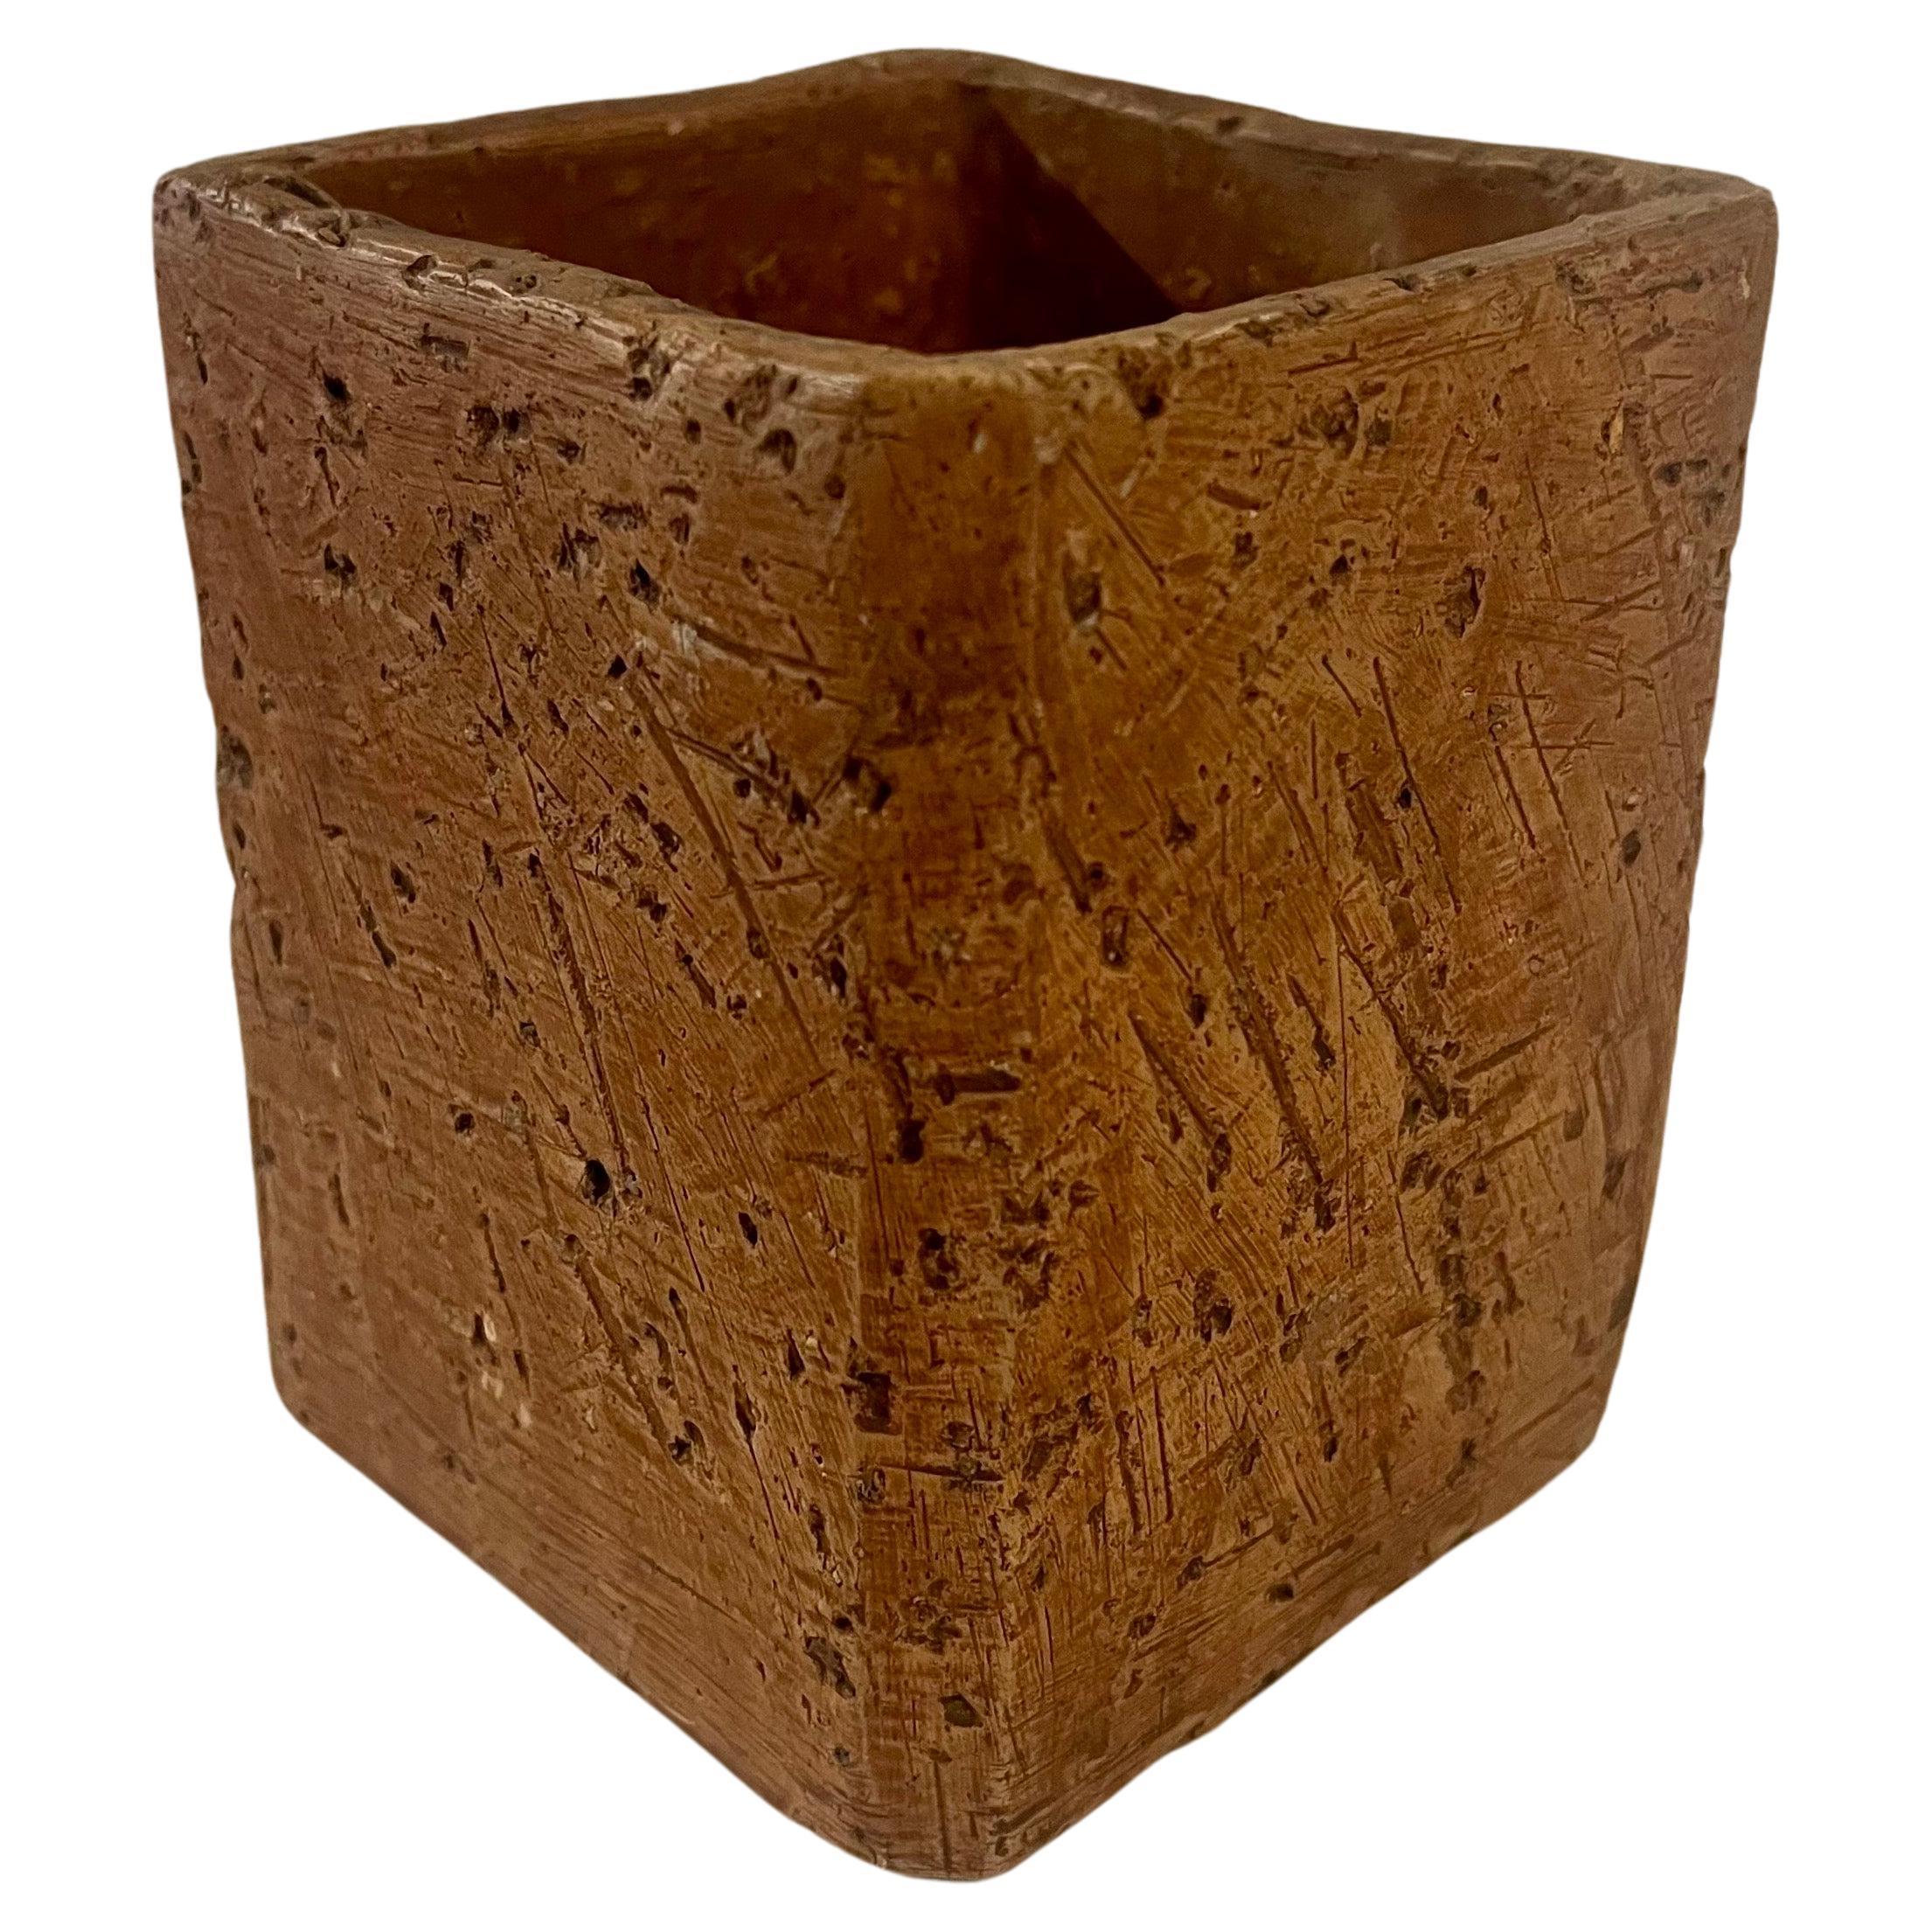 Rare Textured Finish Terracotta Minimalist Mid Century Small Planter WestGermany In Excellent Condition For Sale In San Diego, CA